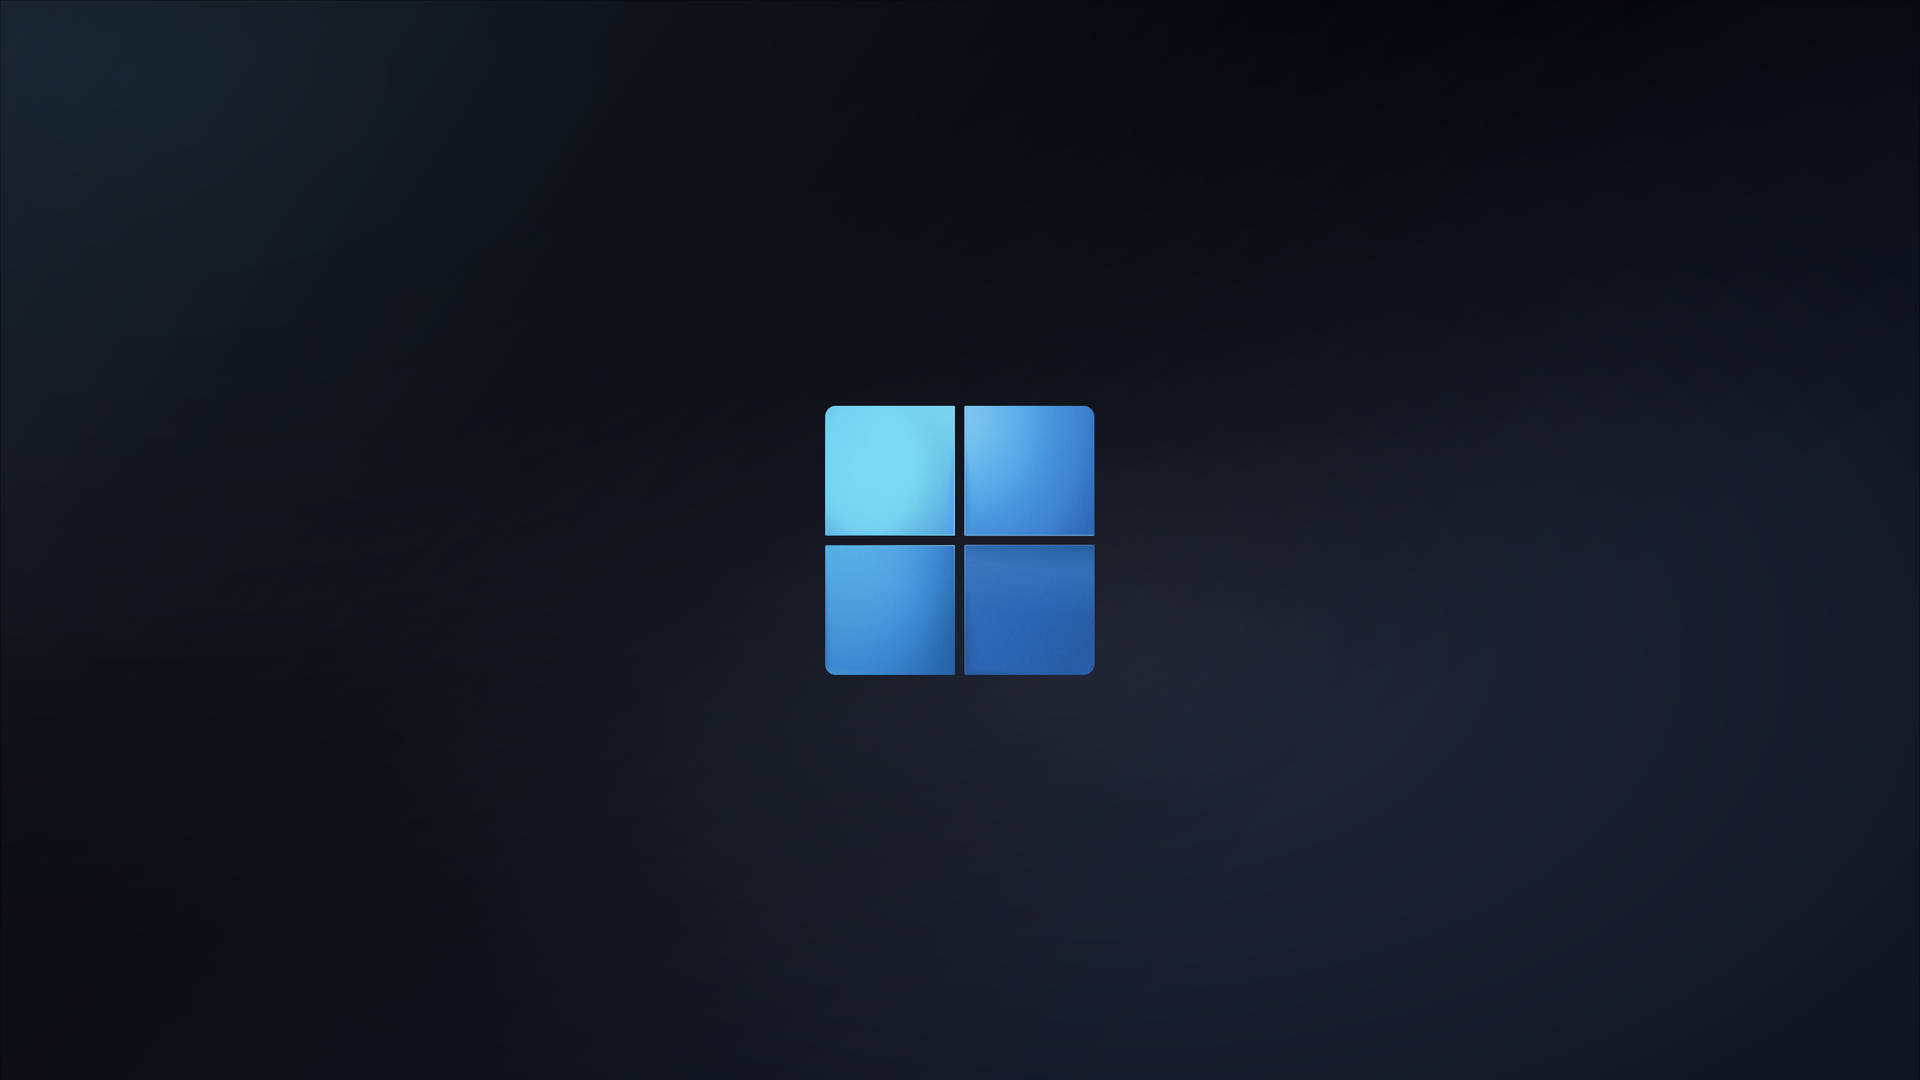 75 Windows 11 Wallpapers & Backgrounds For FREE | Wallpapers.com